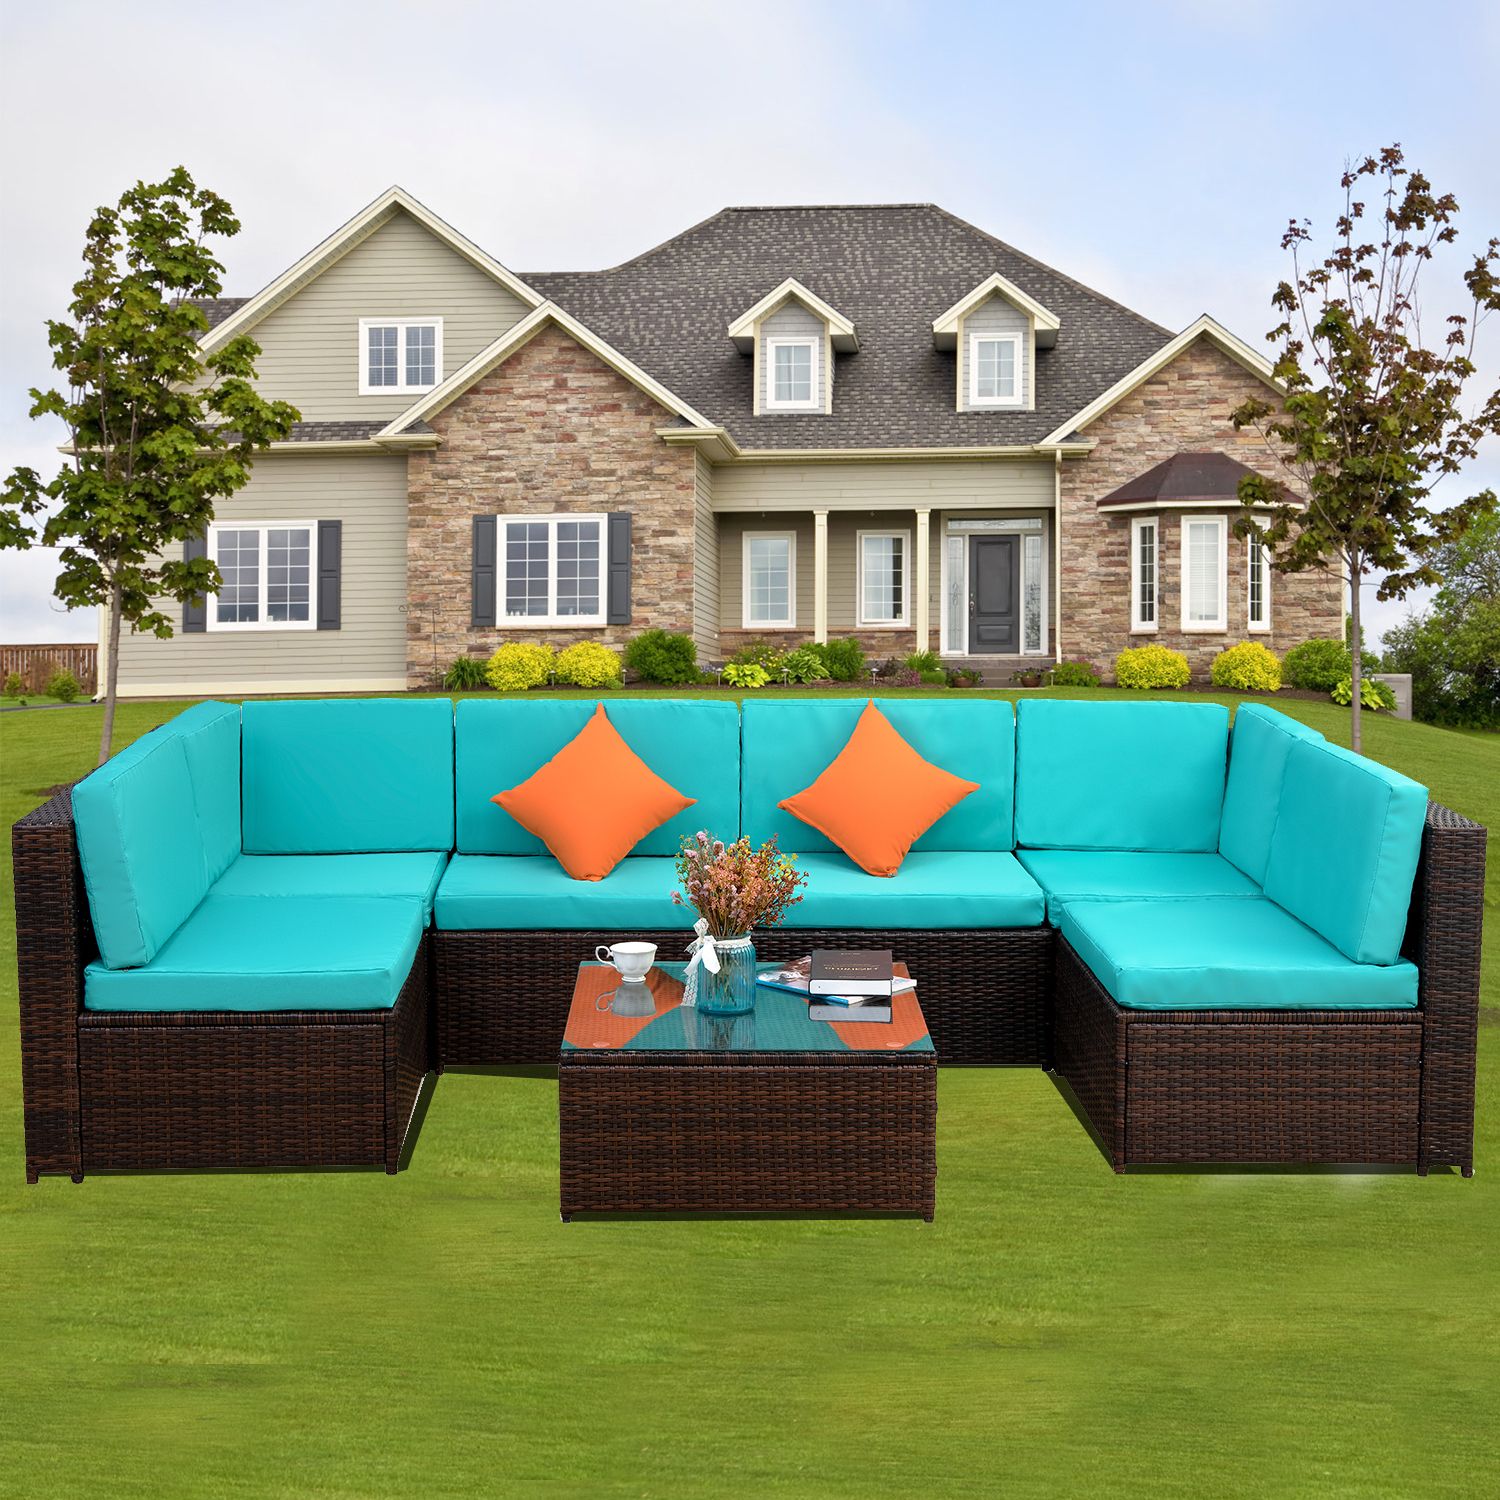 Famous Patio Conversation Sets, 7 Piece Outdoor Furniture Set With Coffee With Regard To Blue And Brown Wicker Outdoor Patio Sets (View 12 of 15)